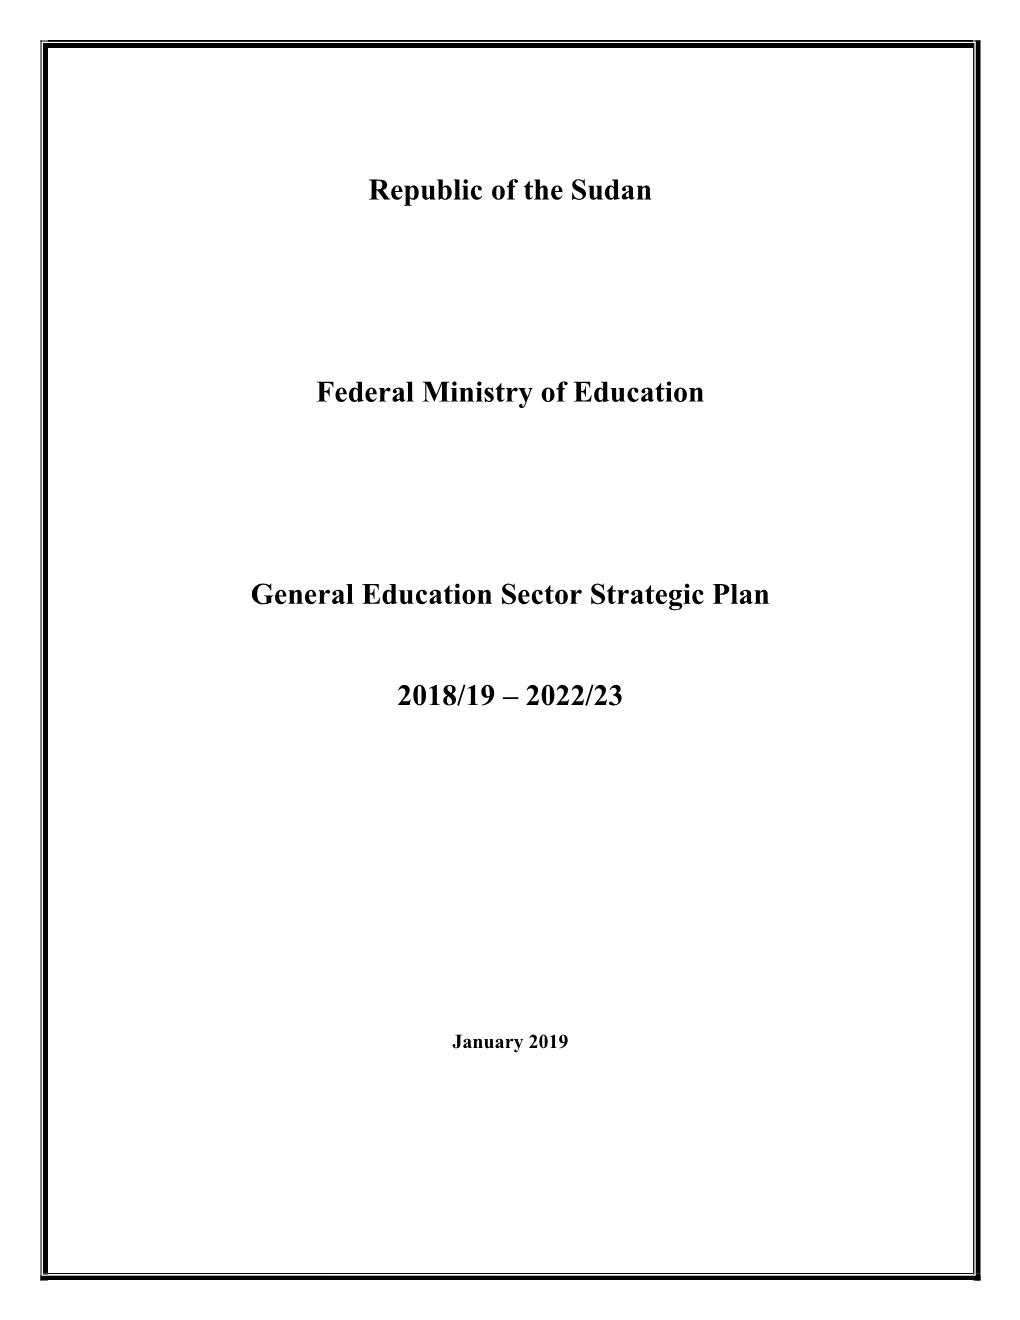 Republic of the Sudan Federal Ministry of Education General